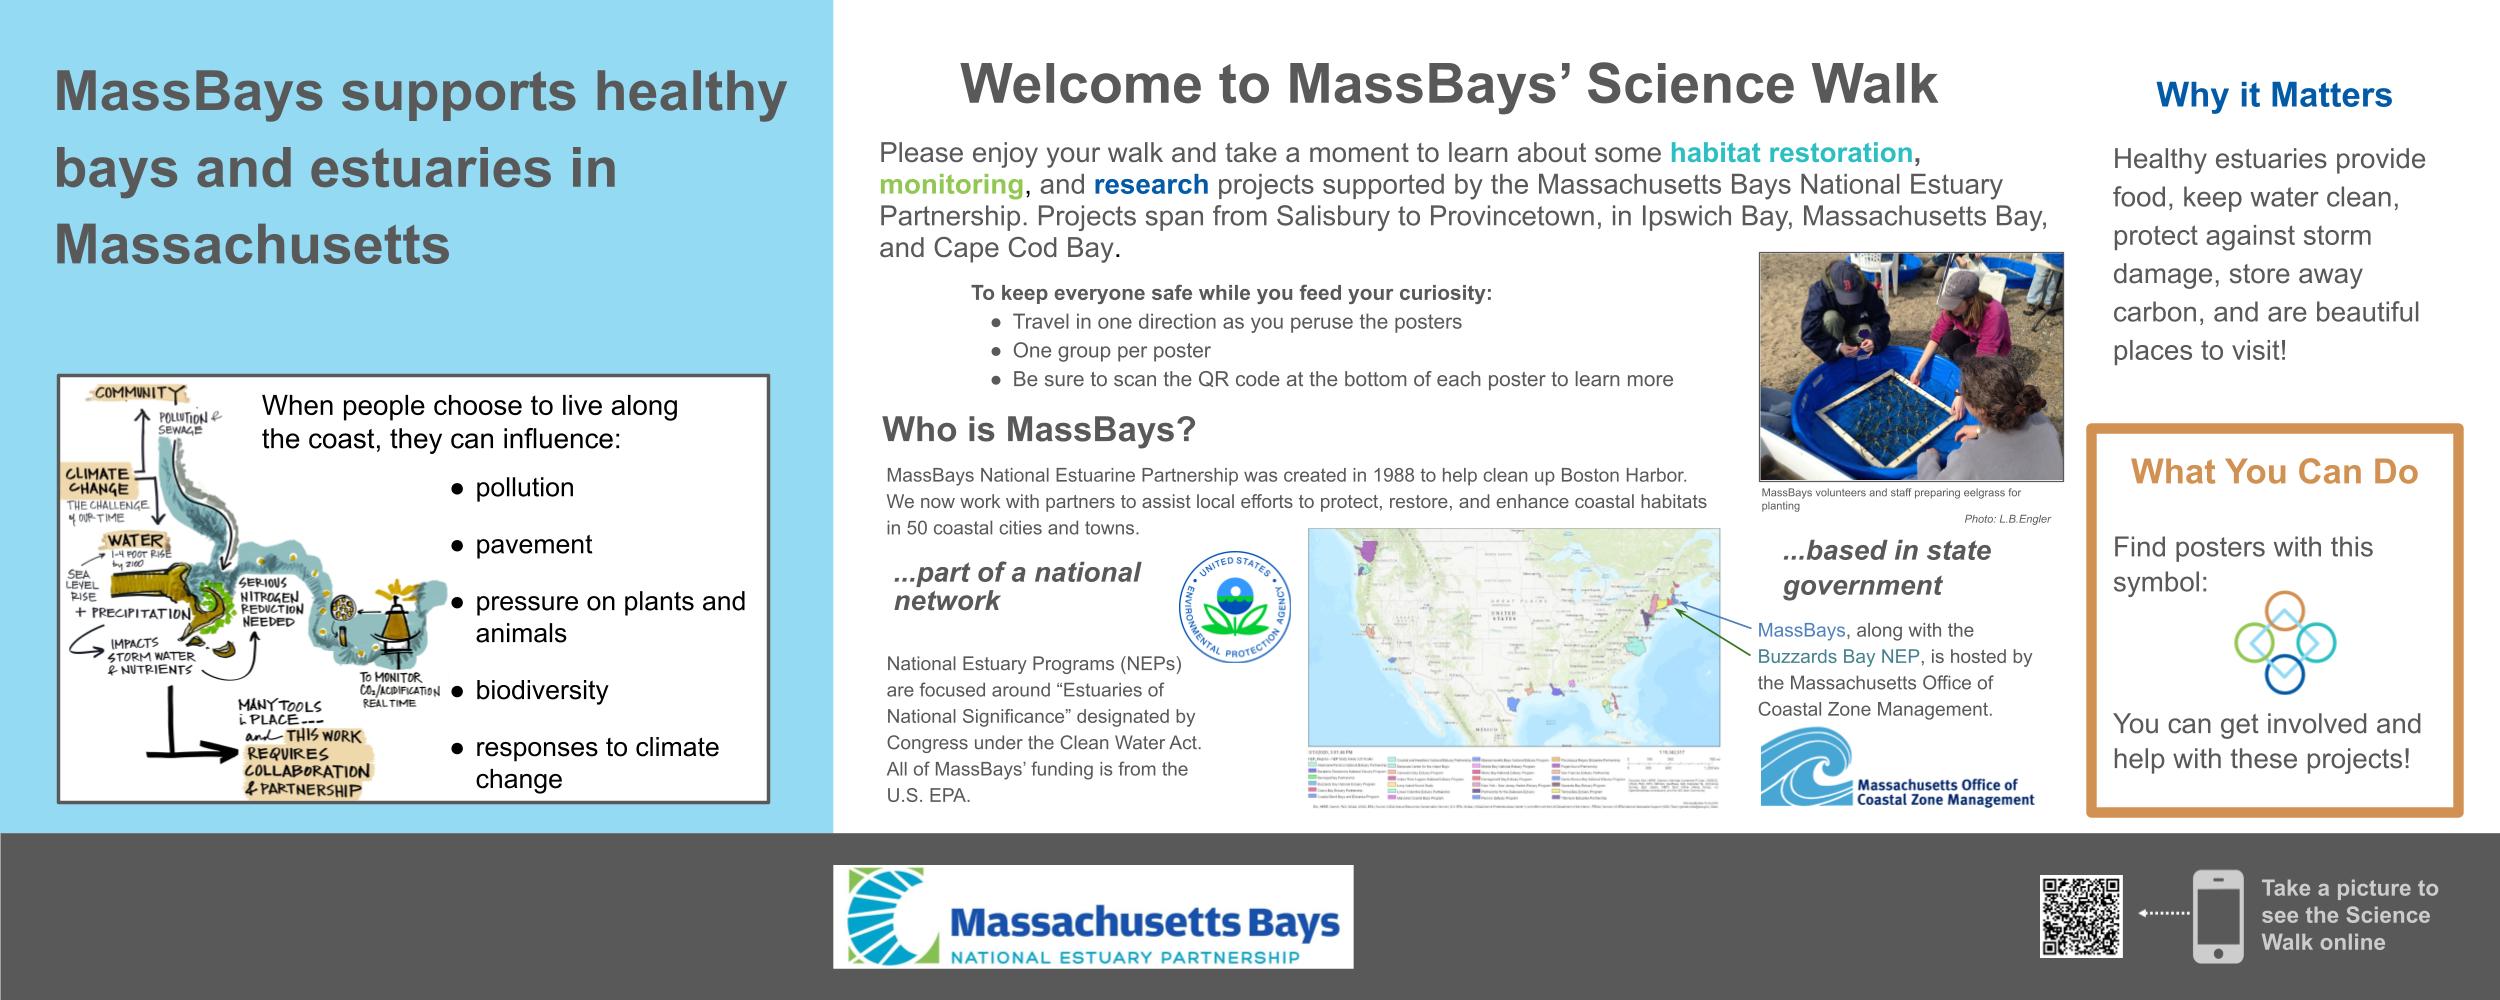 Poster includes a map of the U.S. indicating 28 National Estuary Programs; indicates that MassBays is funded by EPA and hosted by Massachusetts Office of Coastal Zone Management.